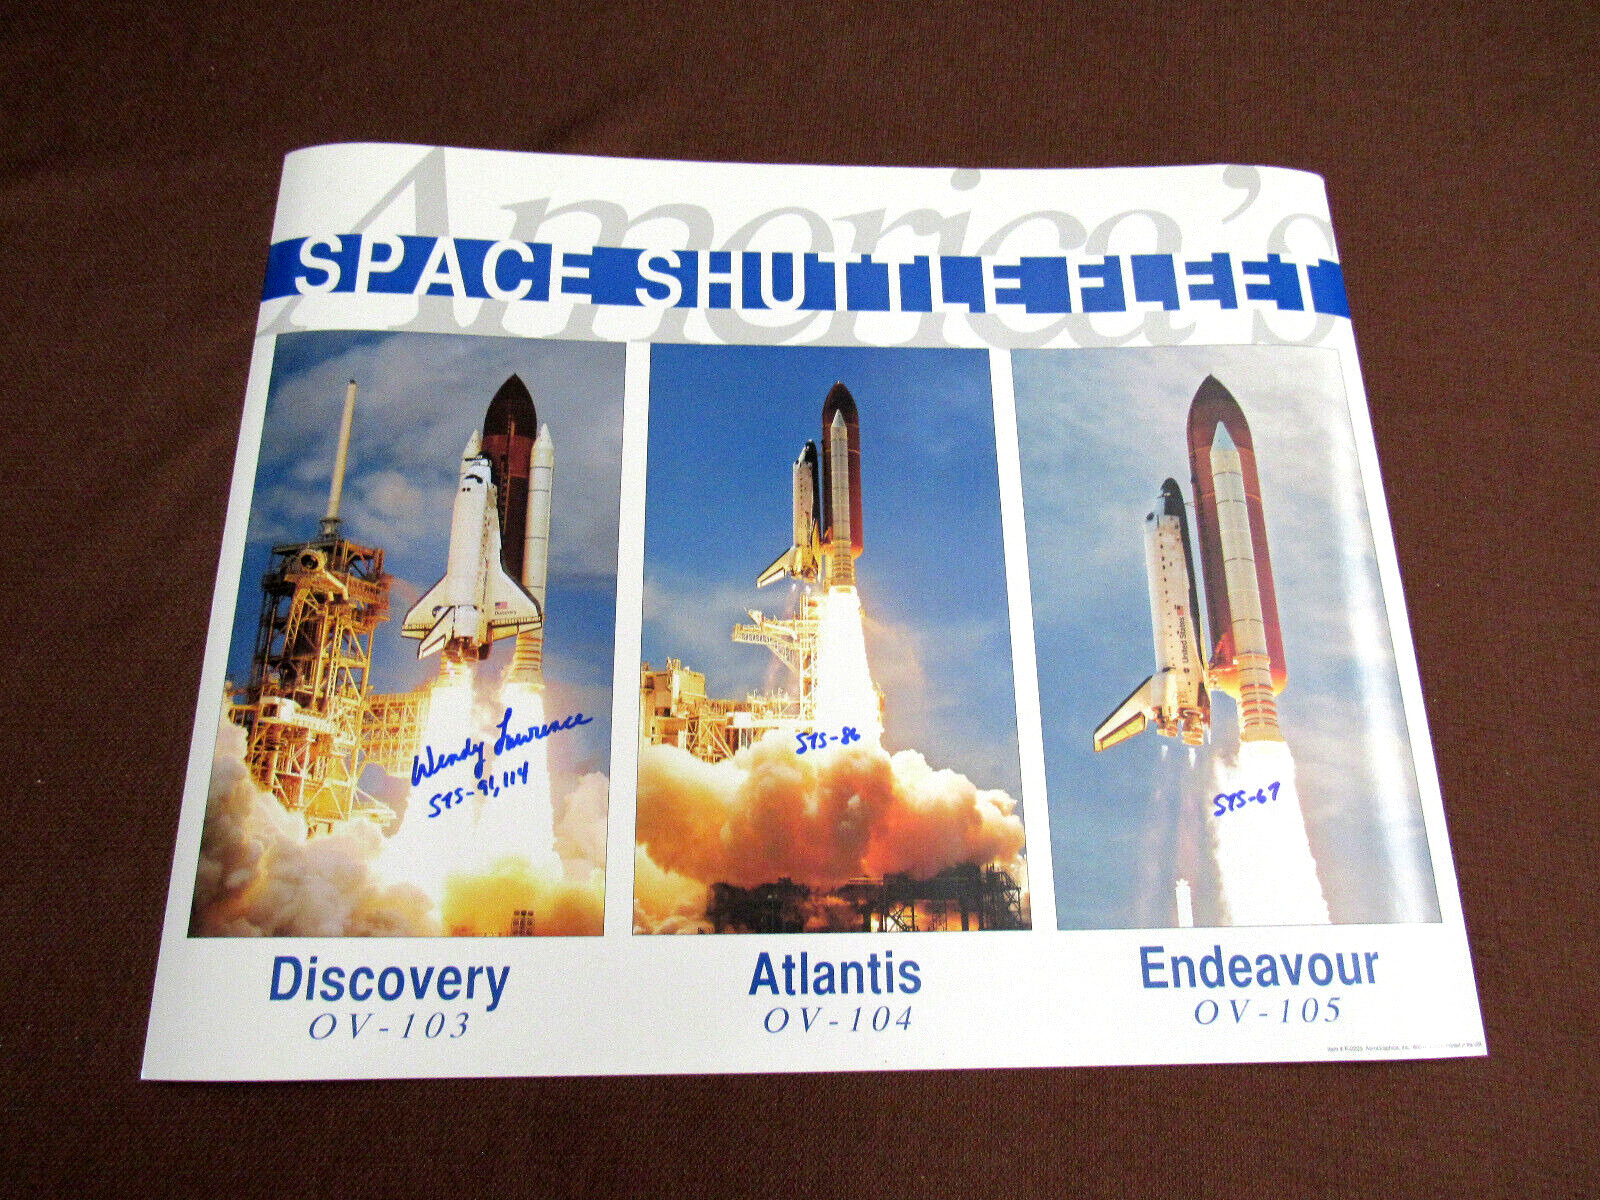 WENDY LAWRENCE STS NASA SHUTTLE ASTRONAUT SIGNED AUTO SPACE SHUTTLE FLEET 16X20